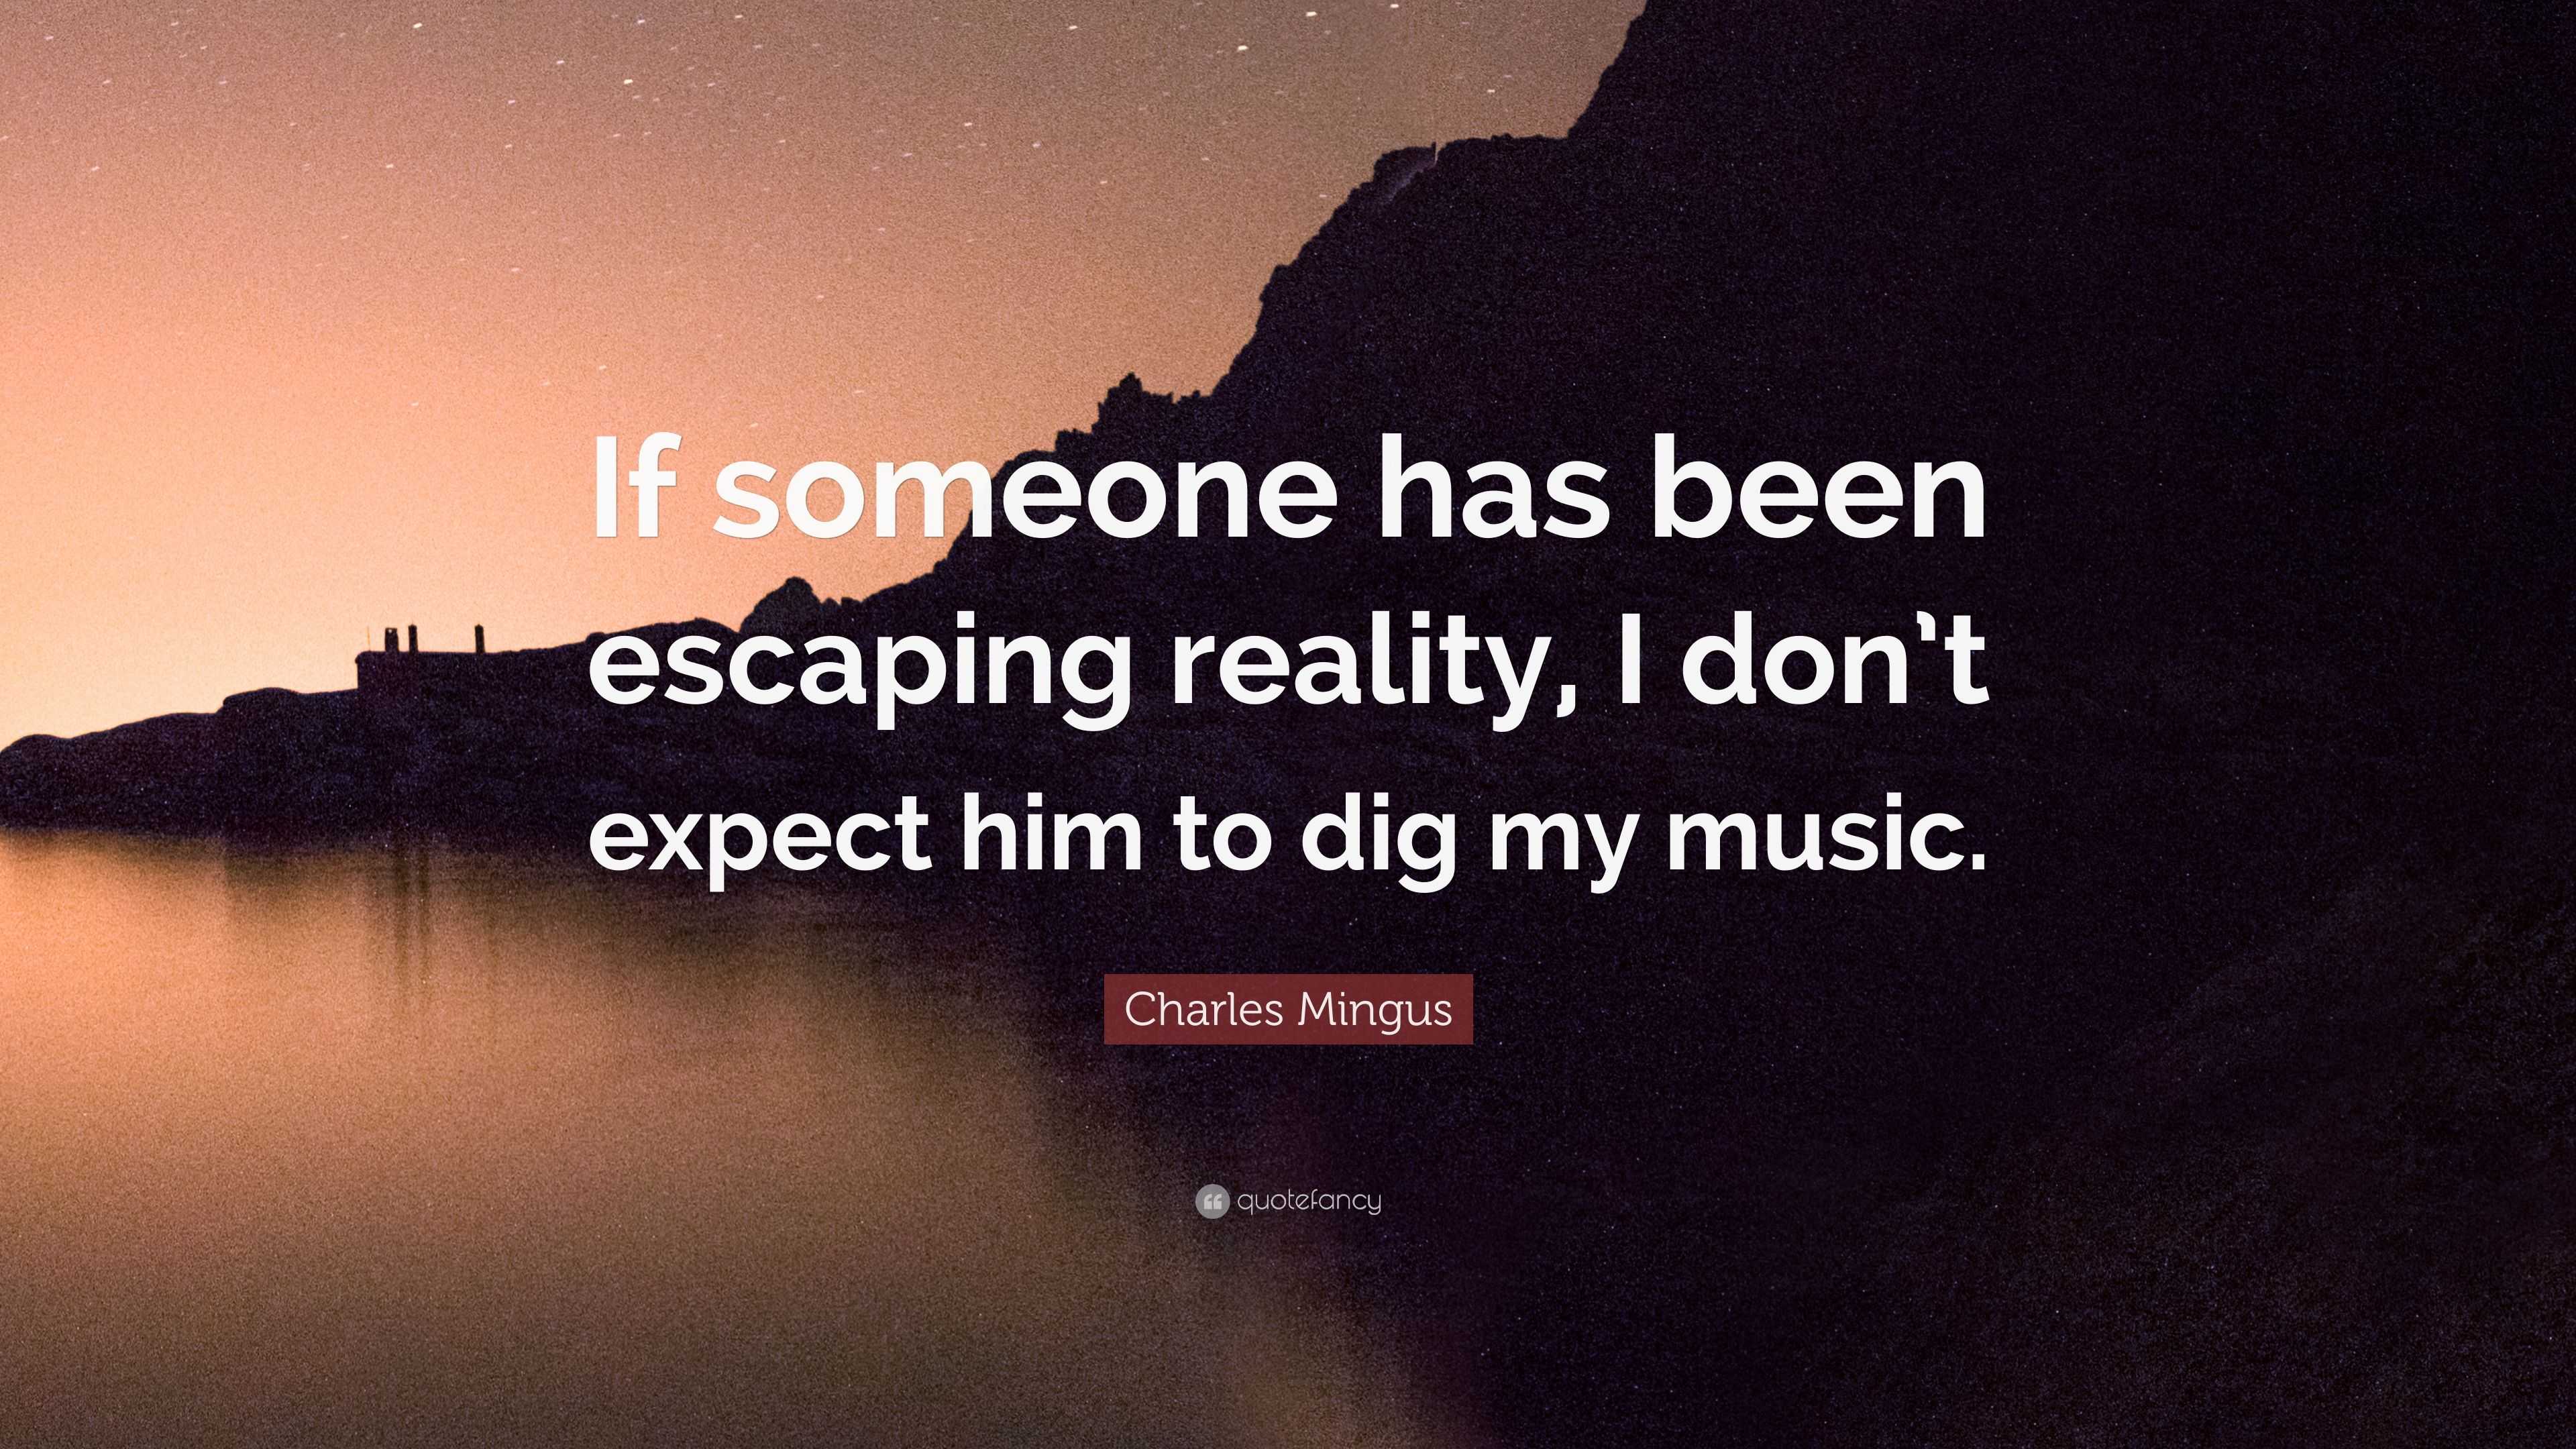 Charles Mingus Quote: “If someone has been escaping reality, I don’t ...